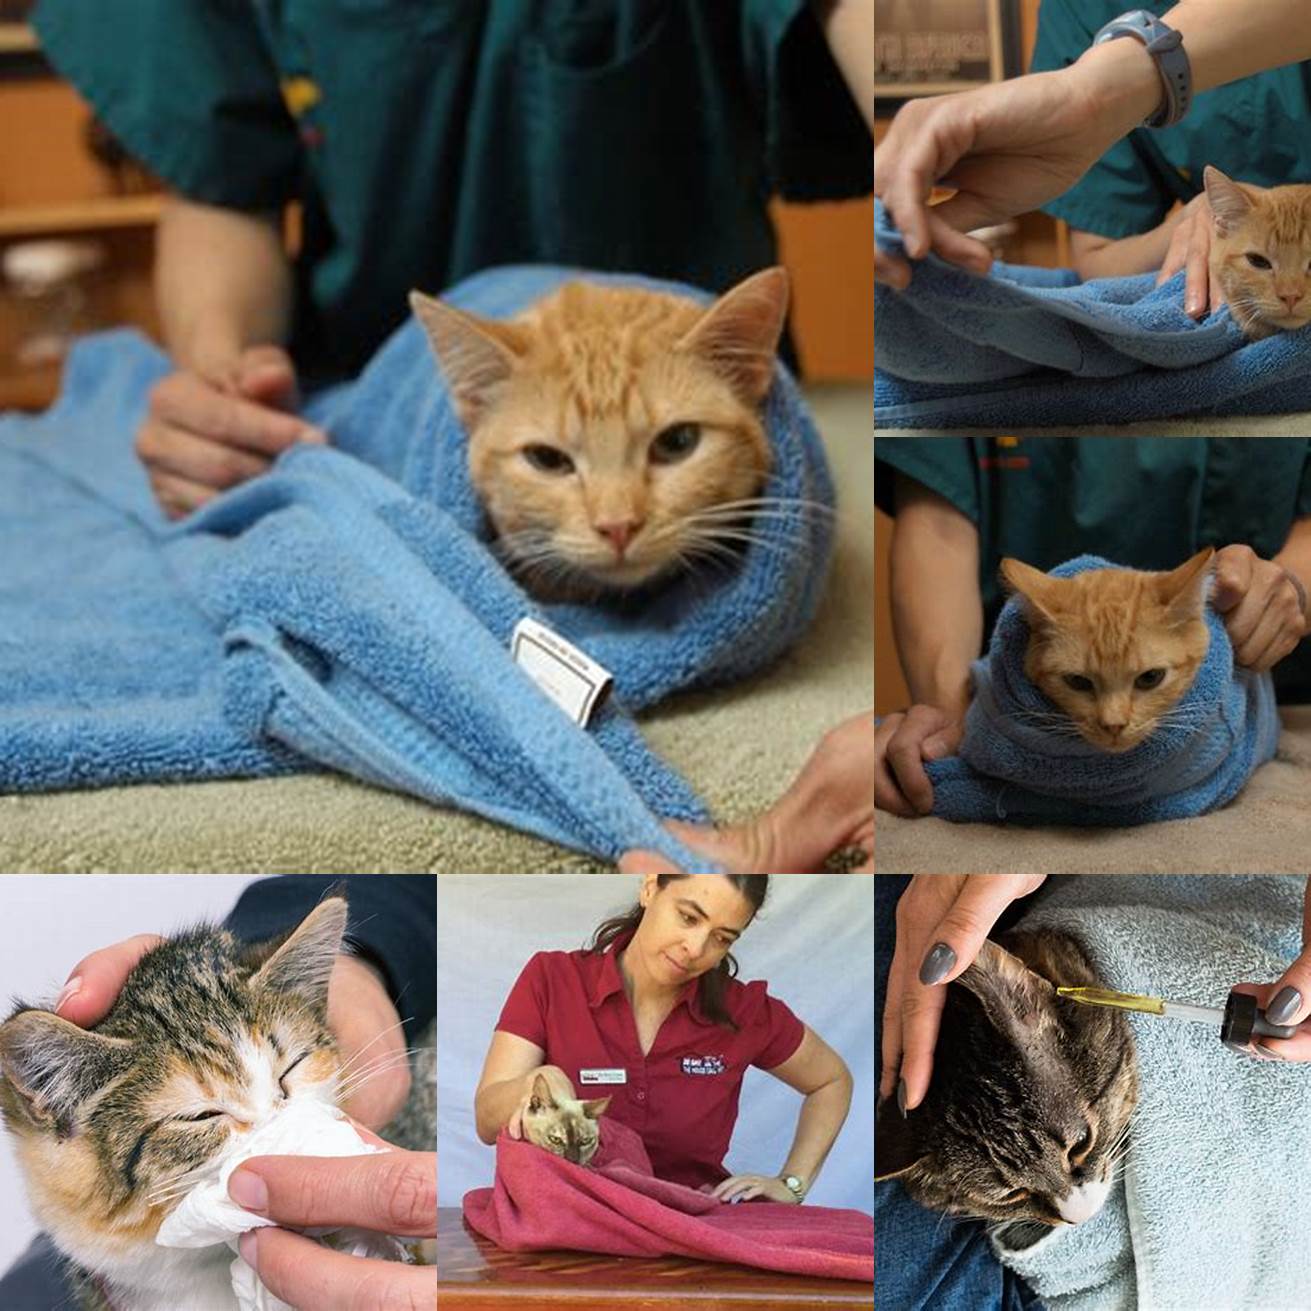 Hold your cat securely and gently wipe the outer ear with the towel to remove any dirt or debris